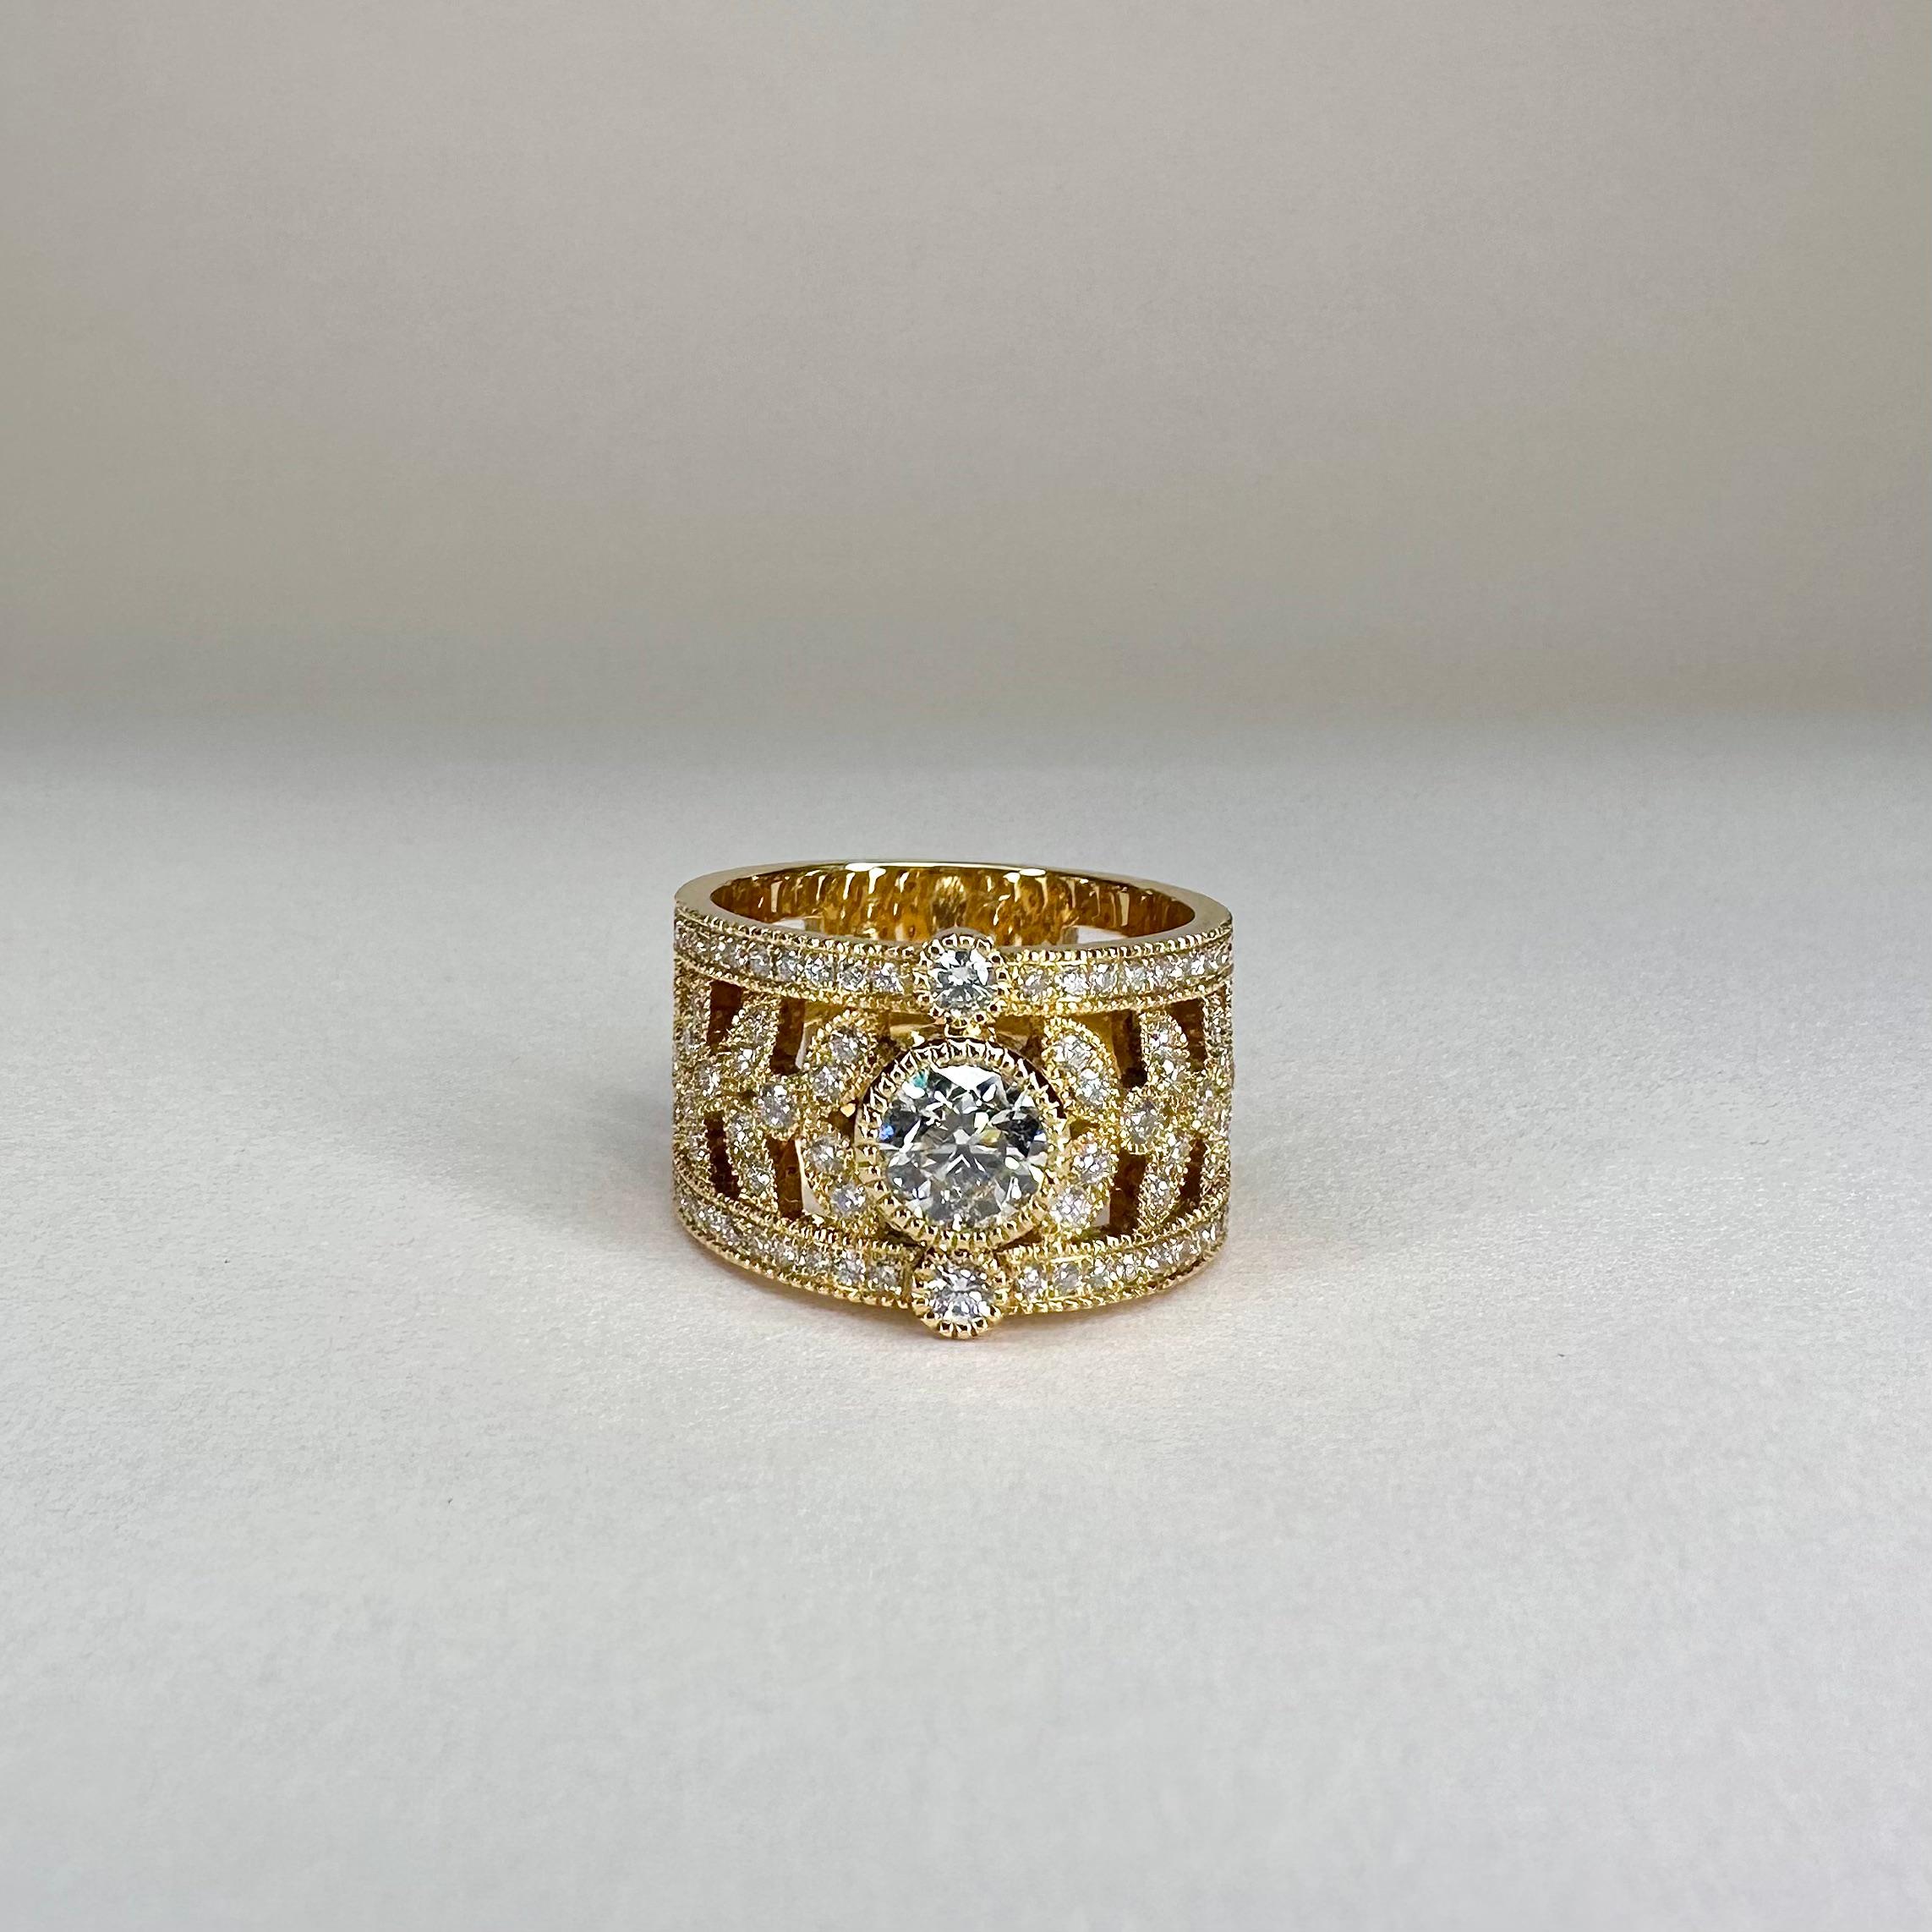 For Sale:  18k Yellow Gold Band Ring 0.70 Carat Diamond GIA Certified and 1 Cts of Diamonds 3